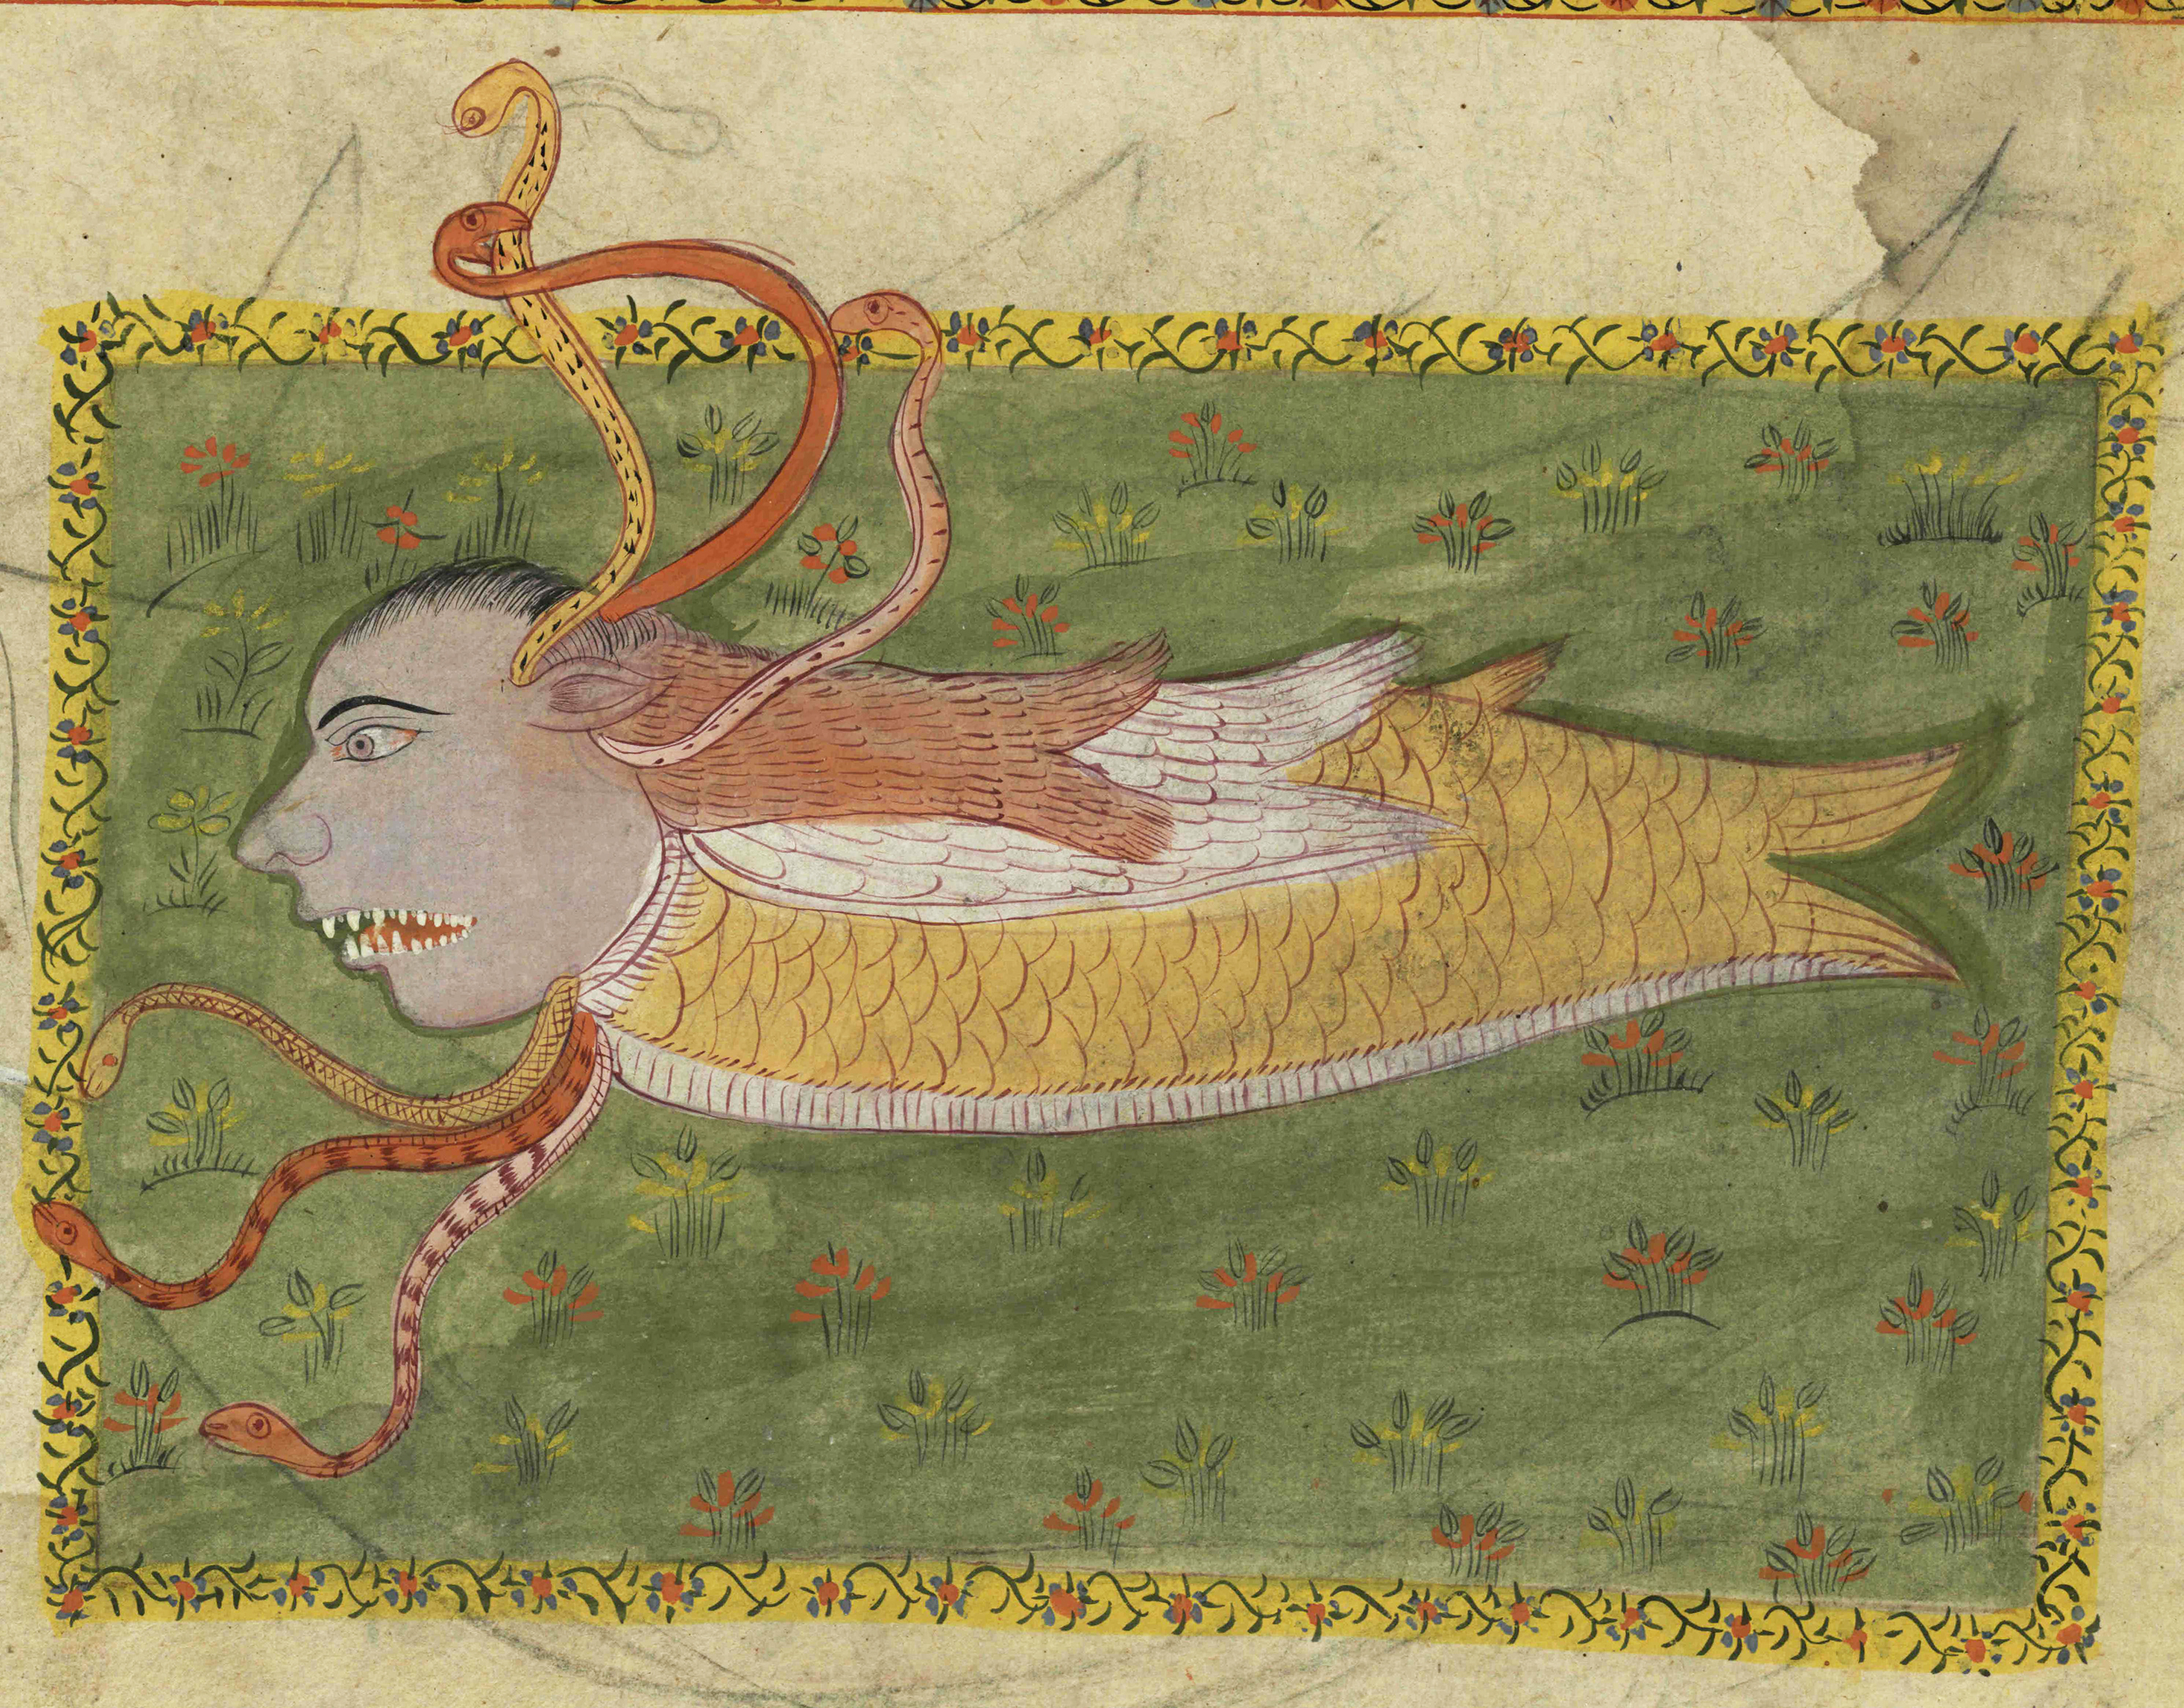 A fish with a human head with snakes coming out of its head, from 17th or 18th century manuscript copy of “The Book of Wonders of the Age” (St Andrews ms32(o))